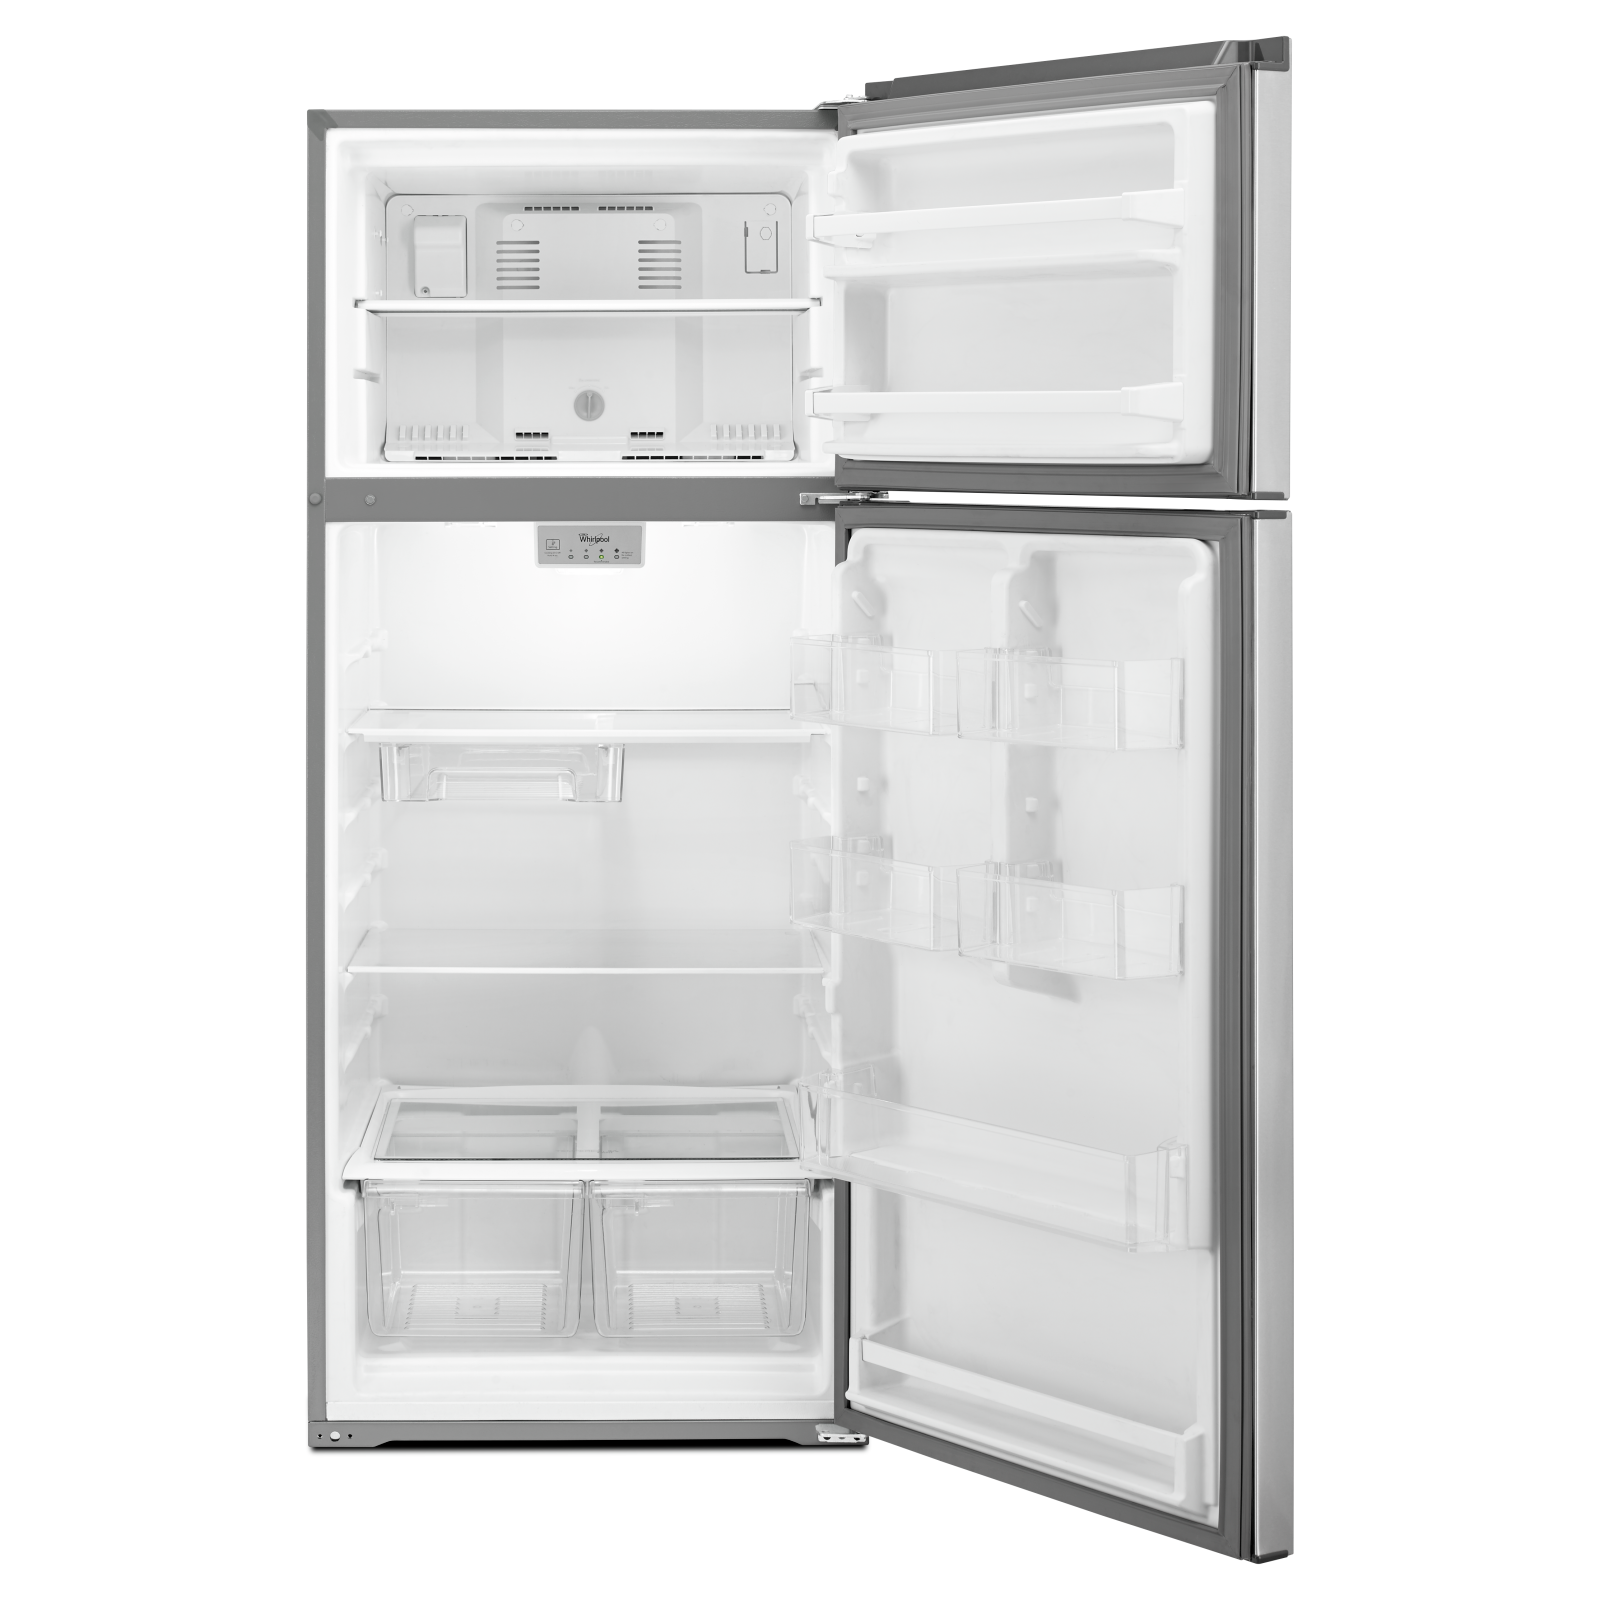 Whirlpool - 28 Inch 17.64 cu. ft Top Mount Refrigerator in Stainless - WRT518SZFM